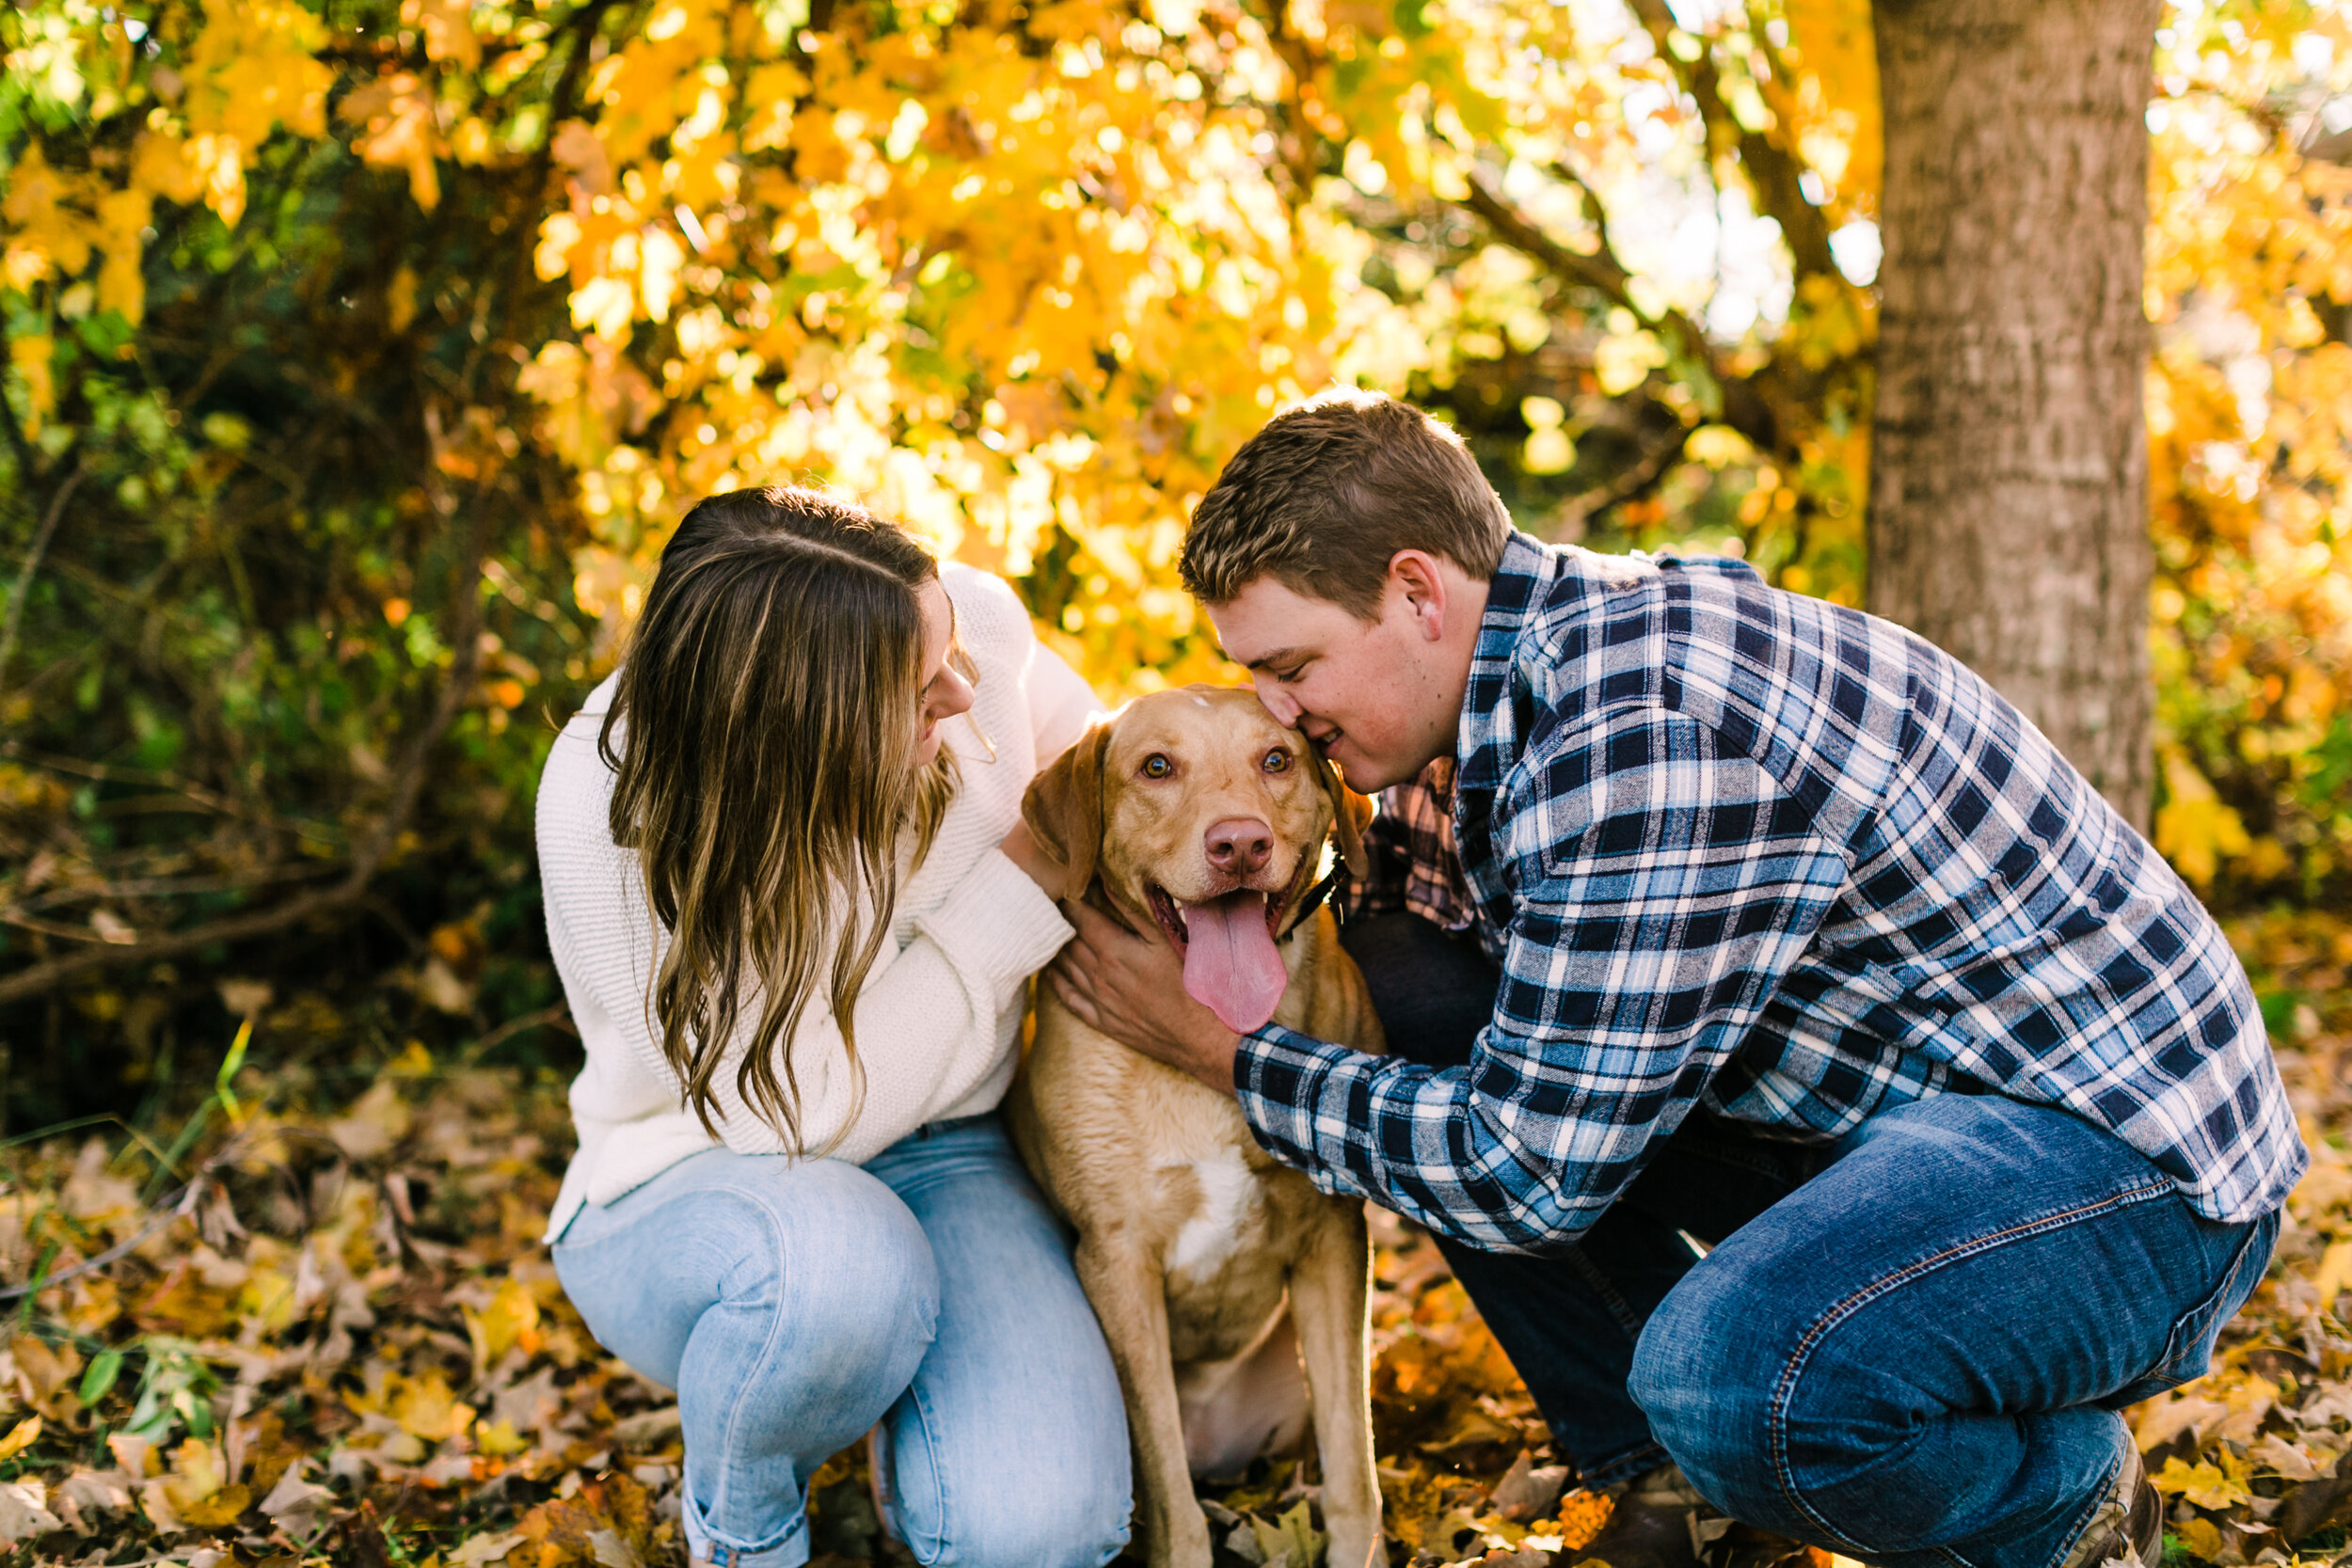 Tennessee+Fall+Engagement+Photos+Puppy (19 of 63).jpg